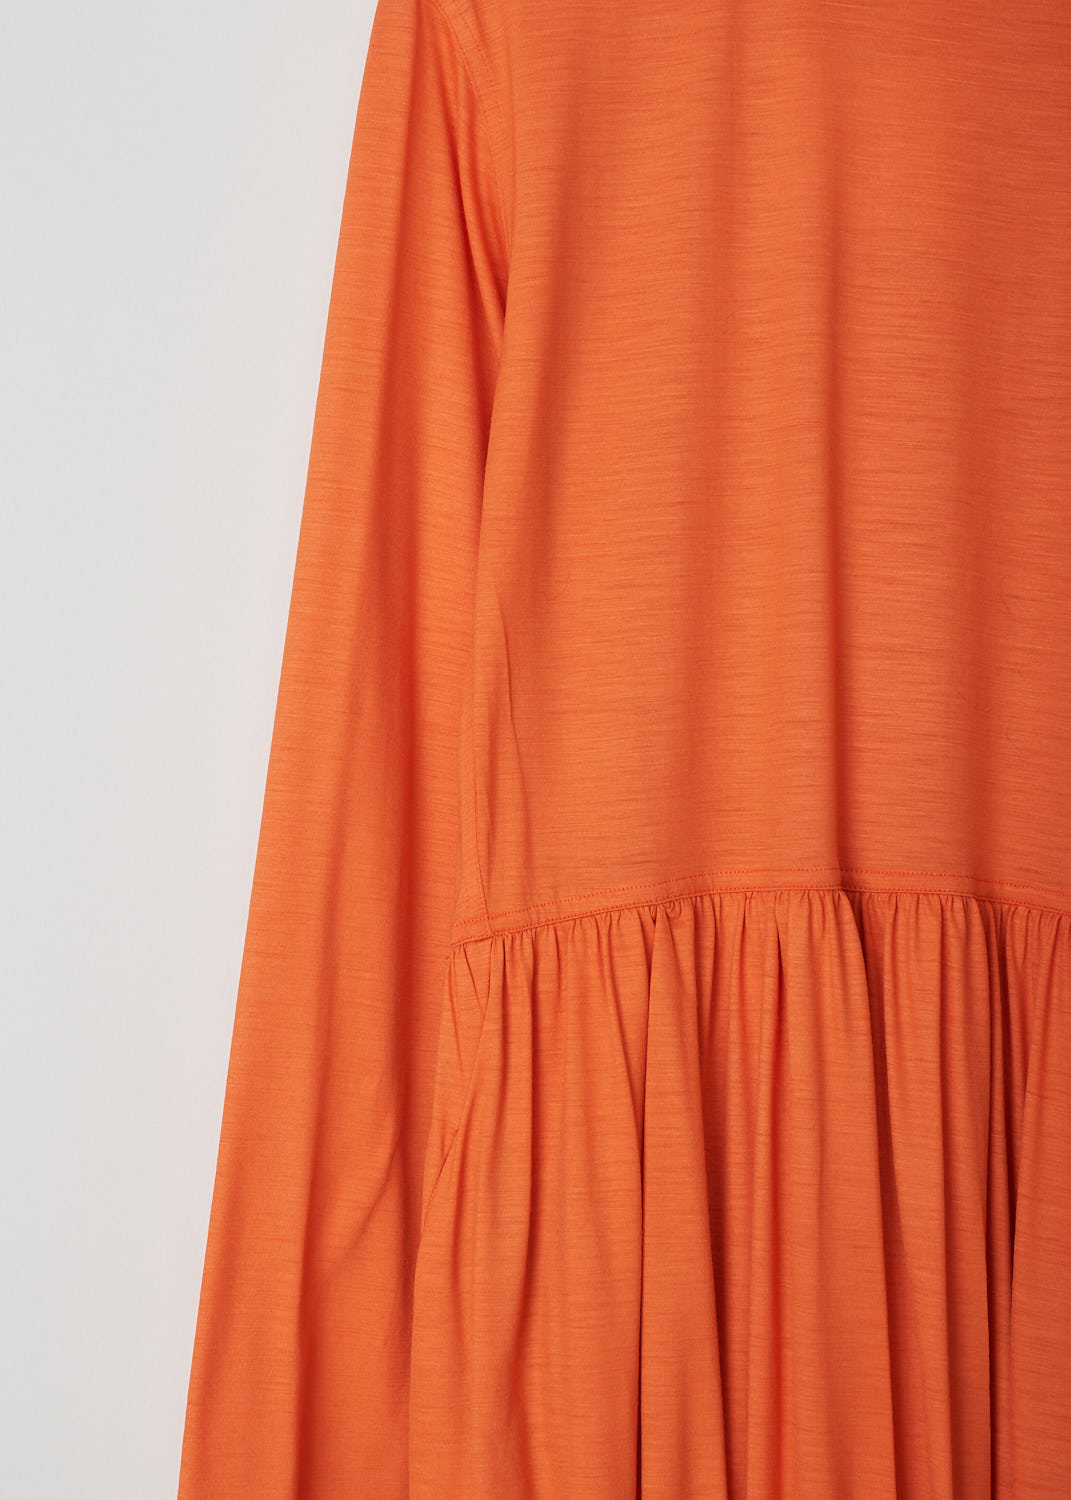 SOFIE Dâ€™HOORE, ORANGE LONG SLEEVE DRESS, DEMURE_WOJE_PAPAYA, Orange, Detail, This orange mid-length dress features a round neckline, a plain long sleeve bodice and a twisted balloon skirt. A single side pocket can be found concealed in the seam. 
